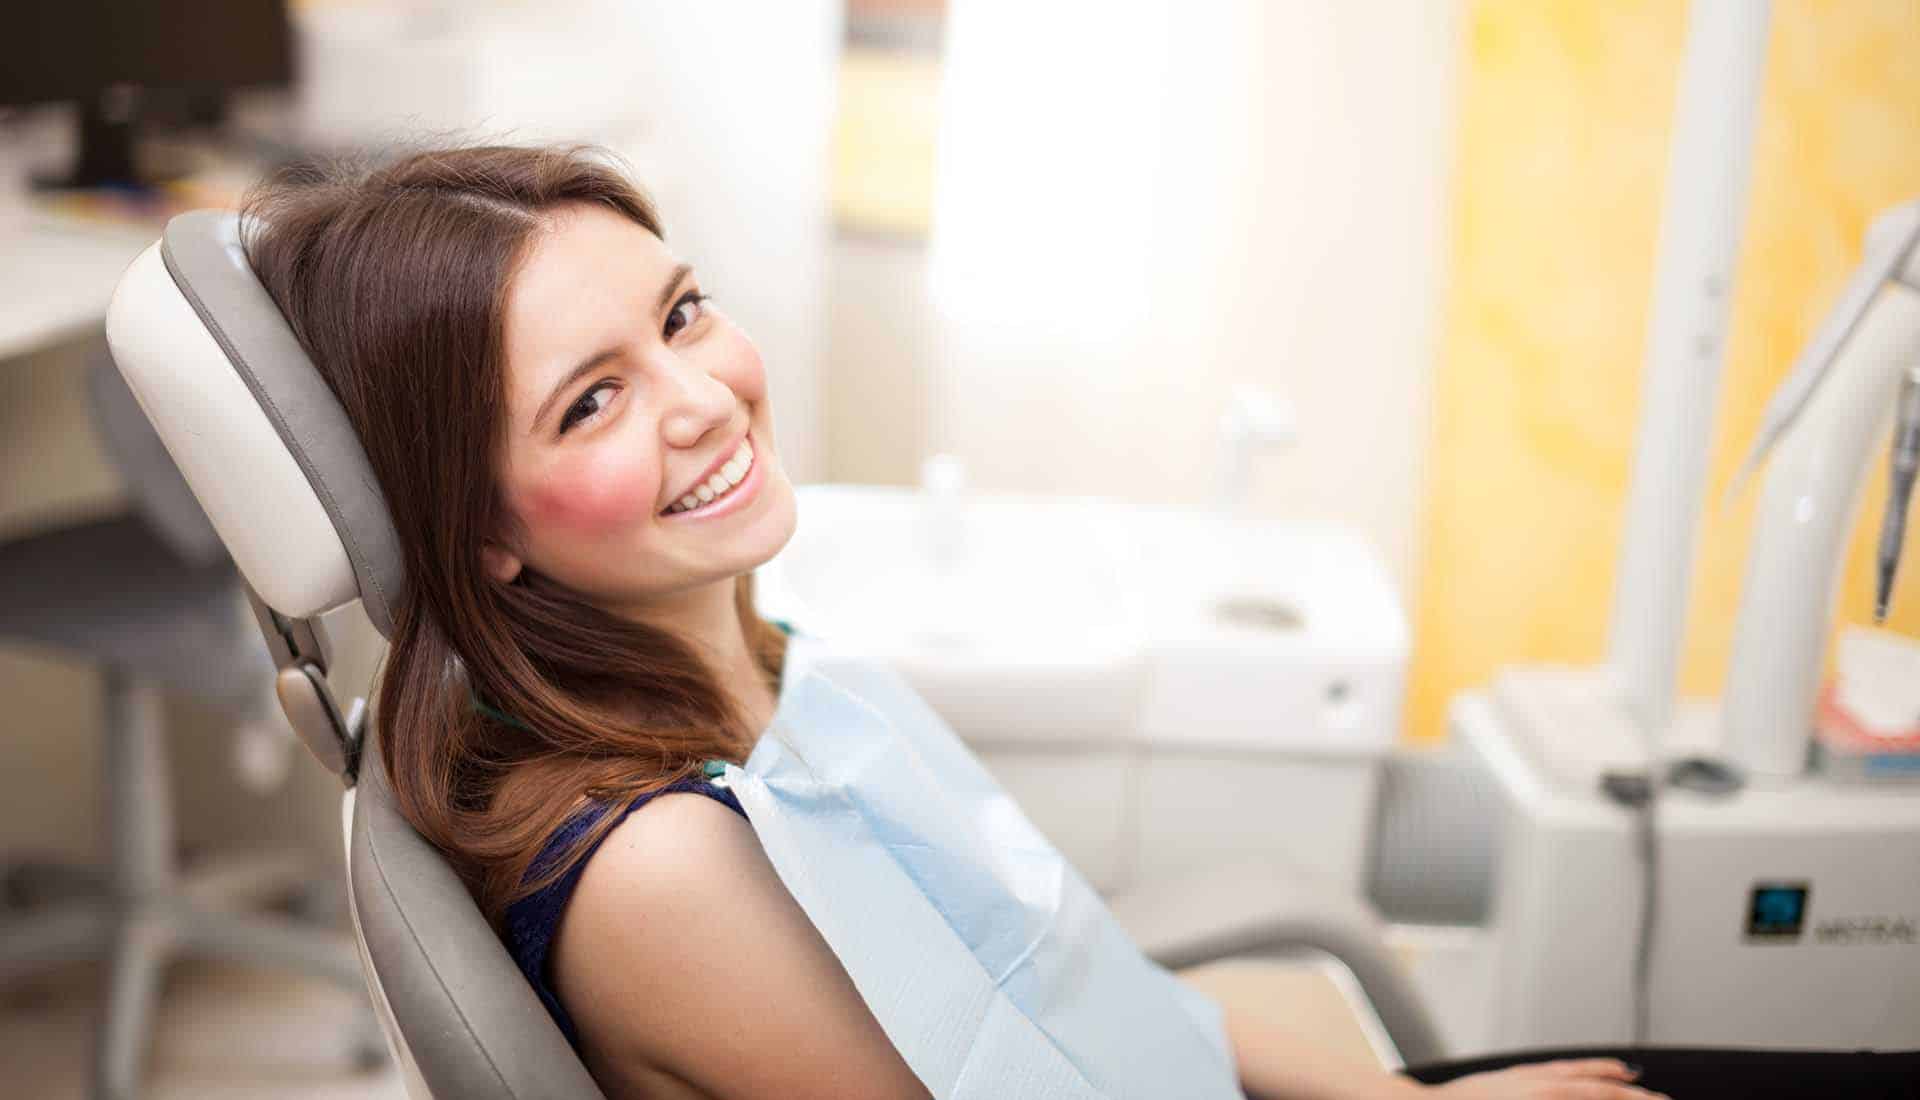 Woman waiting for a dental exam.